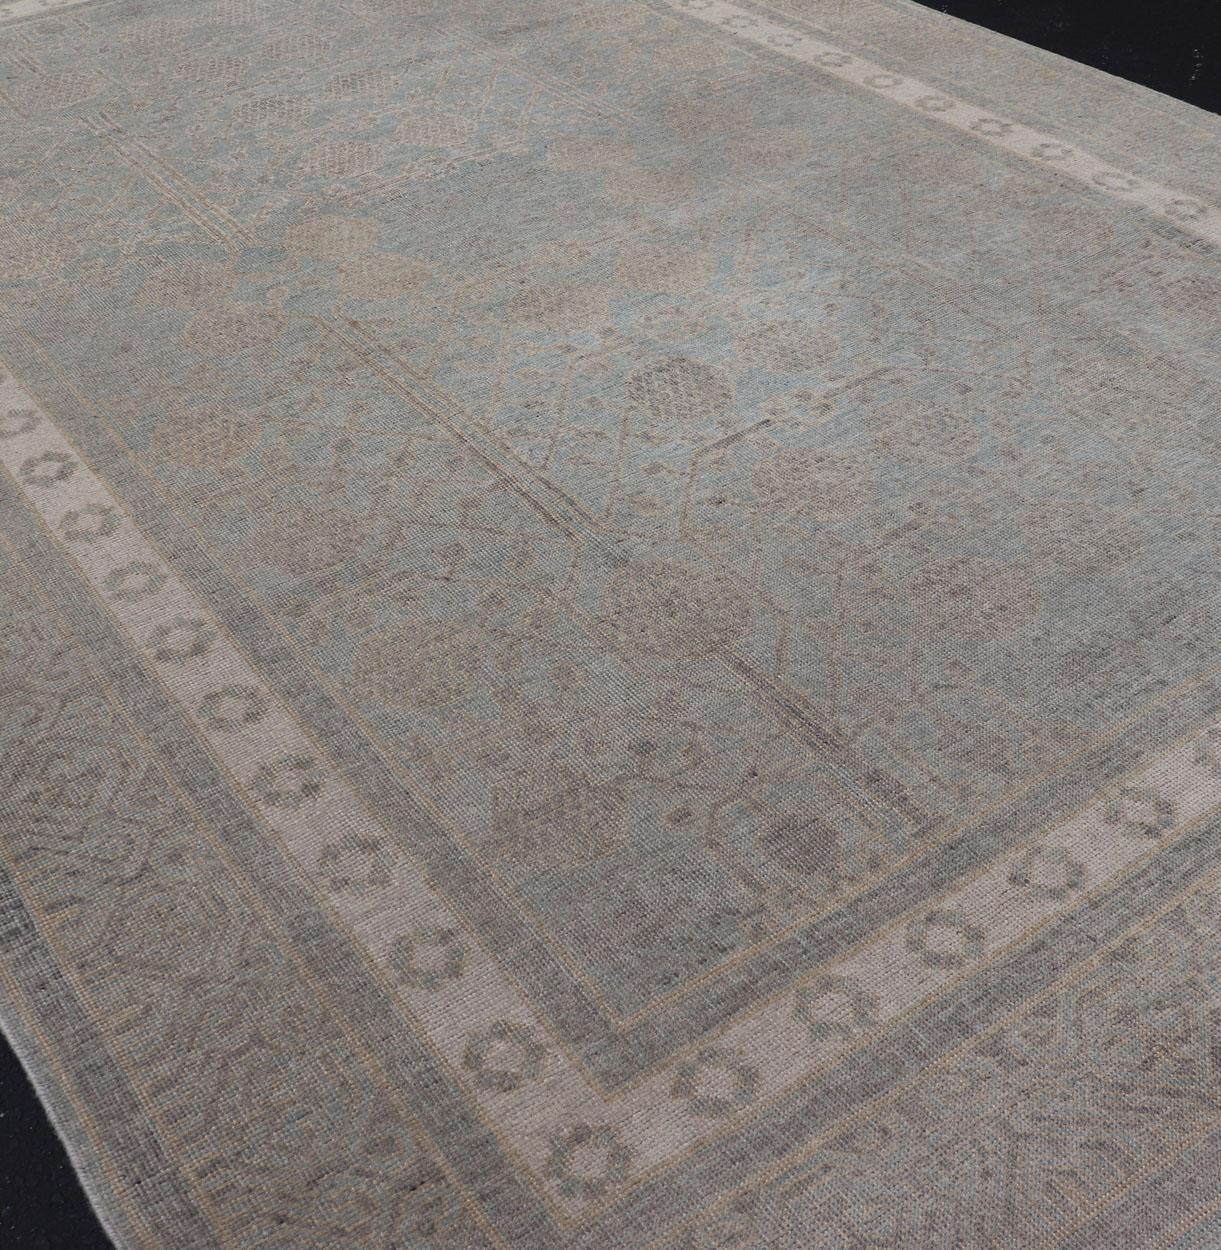 Afghan Khotan Rug with Geometric Design in Shades of Light Blue and Taupe For Sale 5